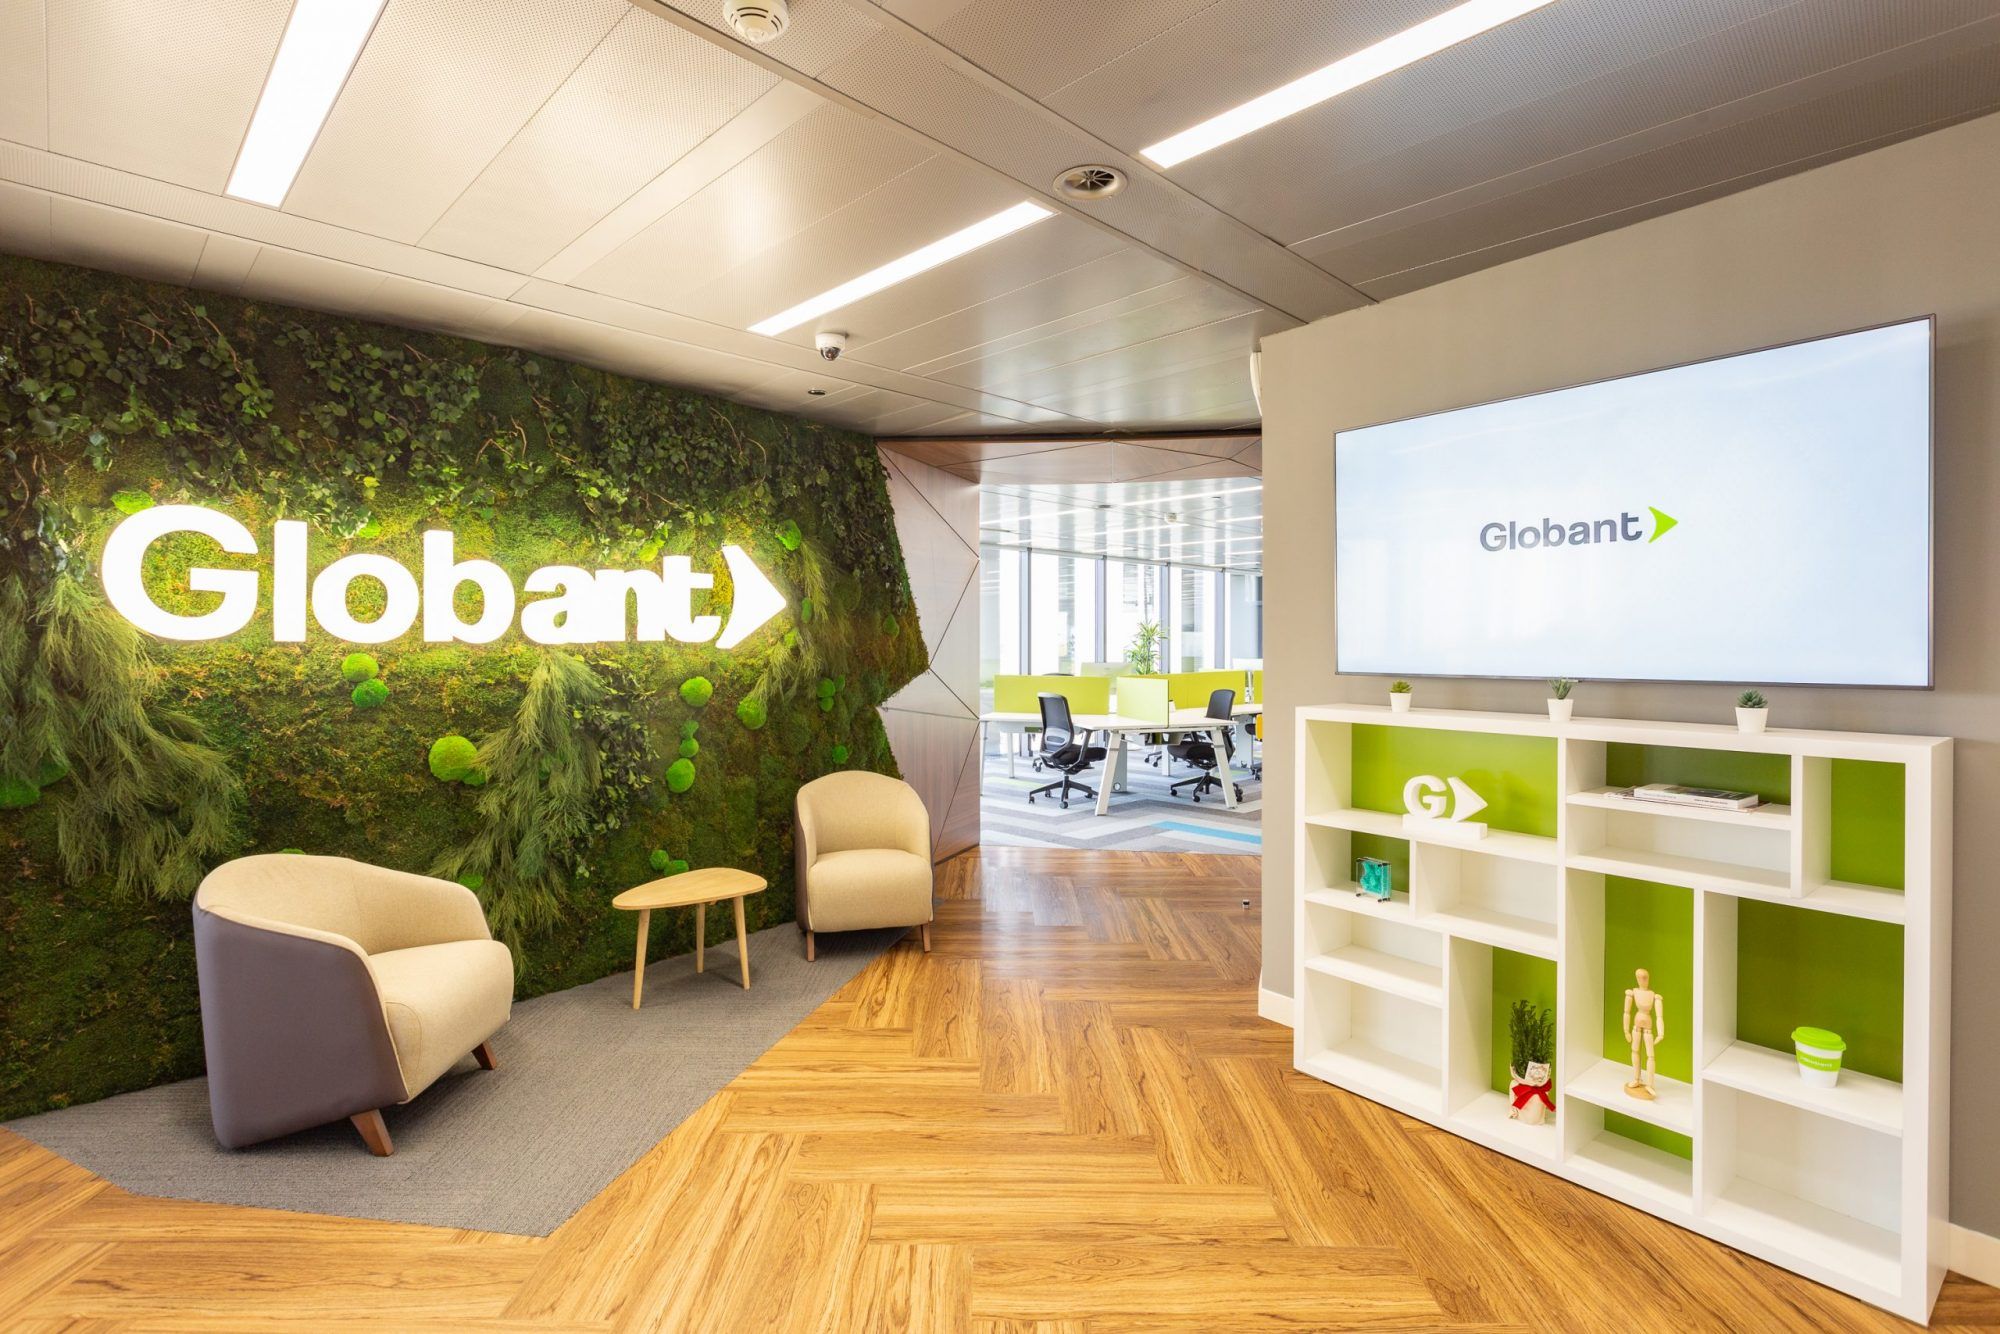 Update: Globant Says System Accessed by Unauthorized Actor